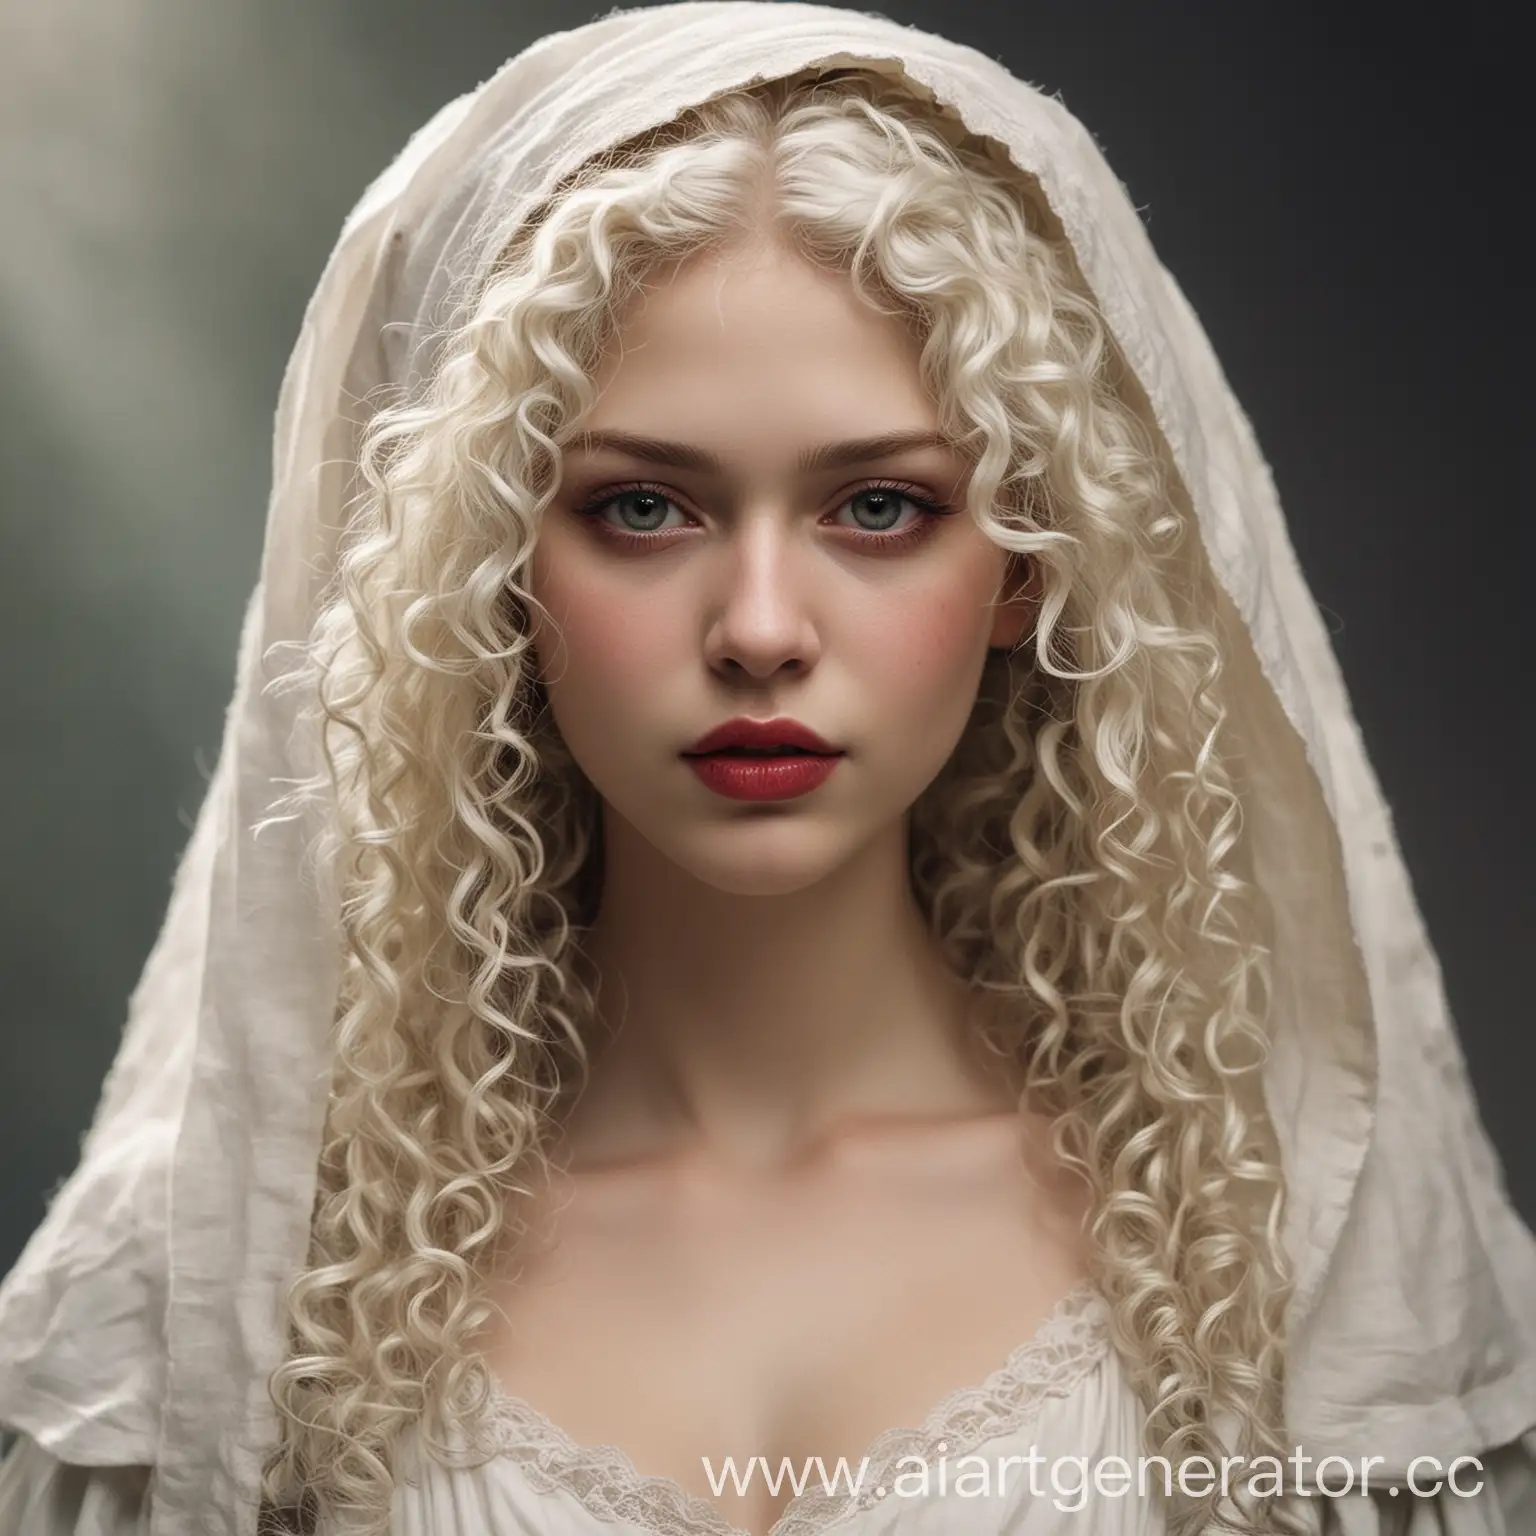 Young-Woman-in-White-Mantle-with-Cherry-Lips-and-Frowning-Eyebrows